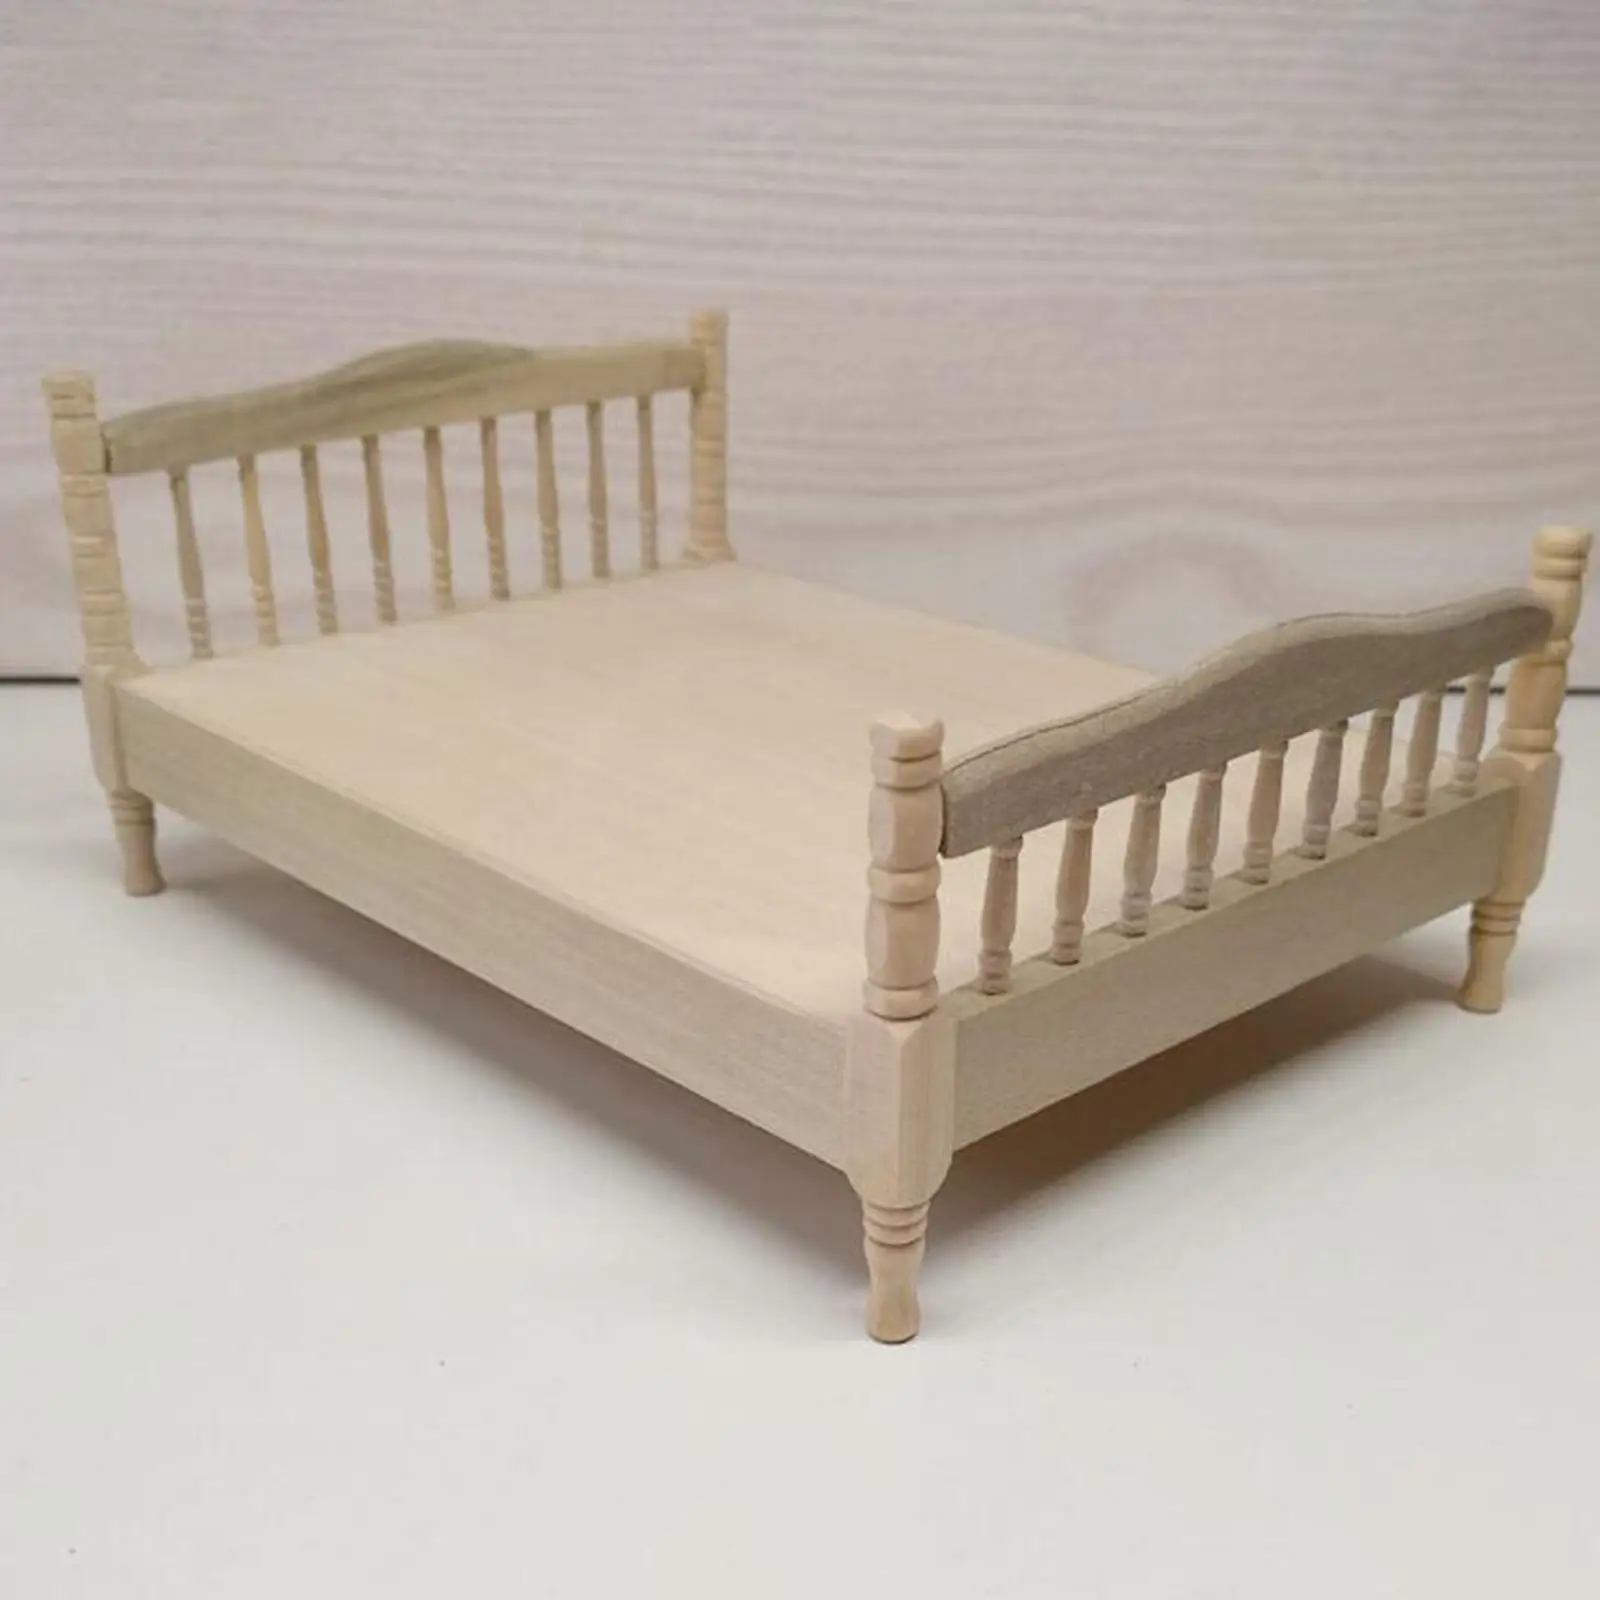 1/12 Dollhouse Bed Collections Realistic Wooden Bed Model for Model Train Miniature Scene Building DIY Projects Micro Landscape